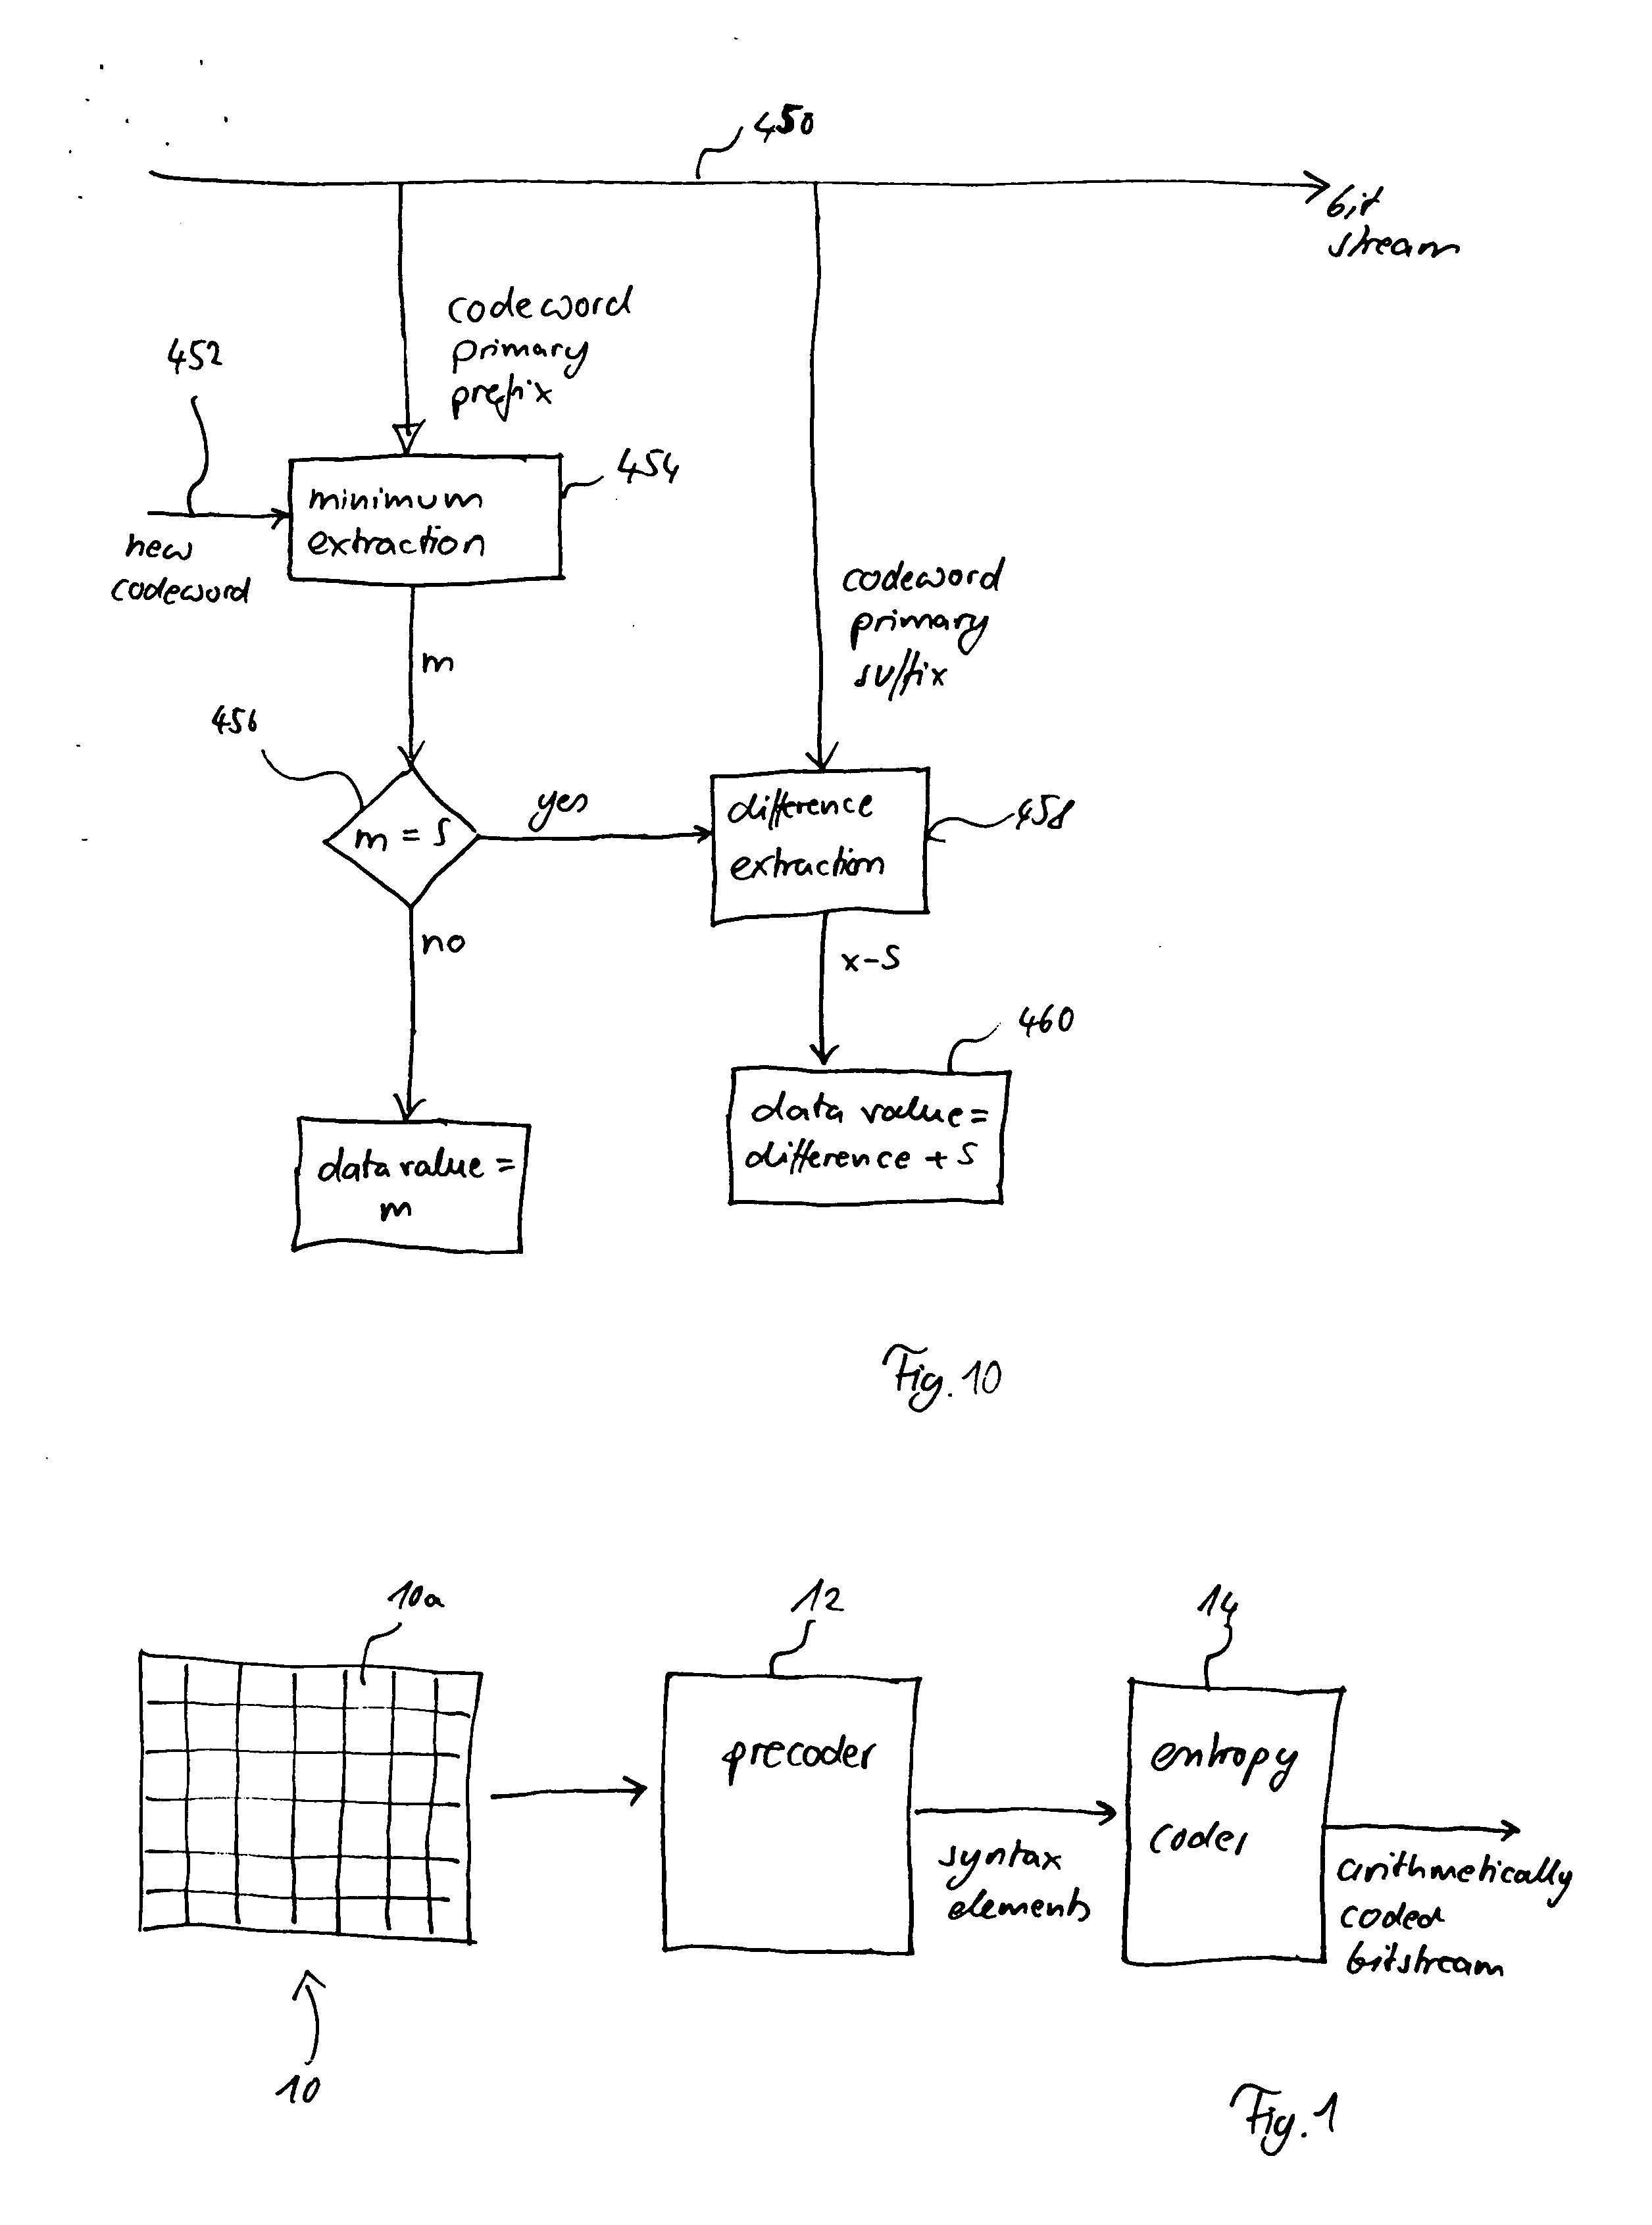 Method and apparatus for binarization and arithmetic coding of a data value